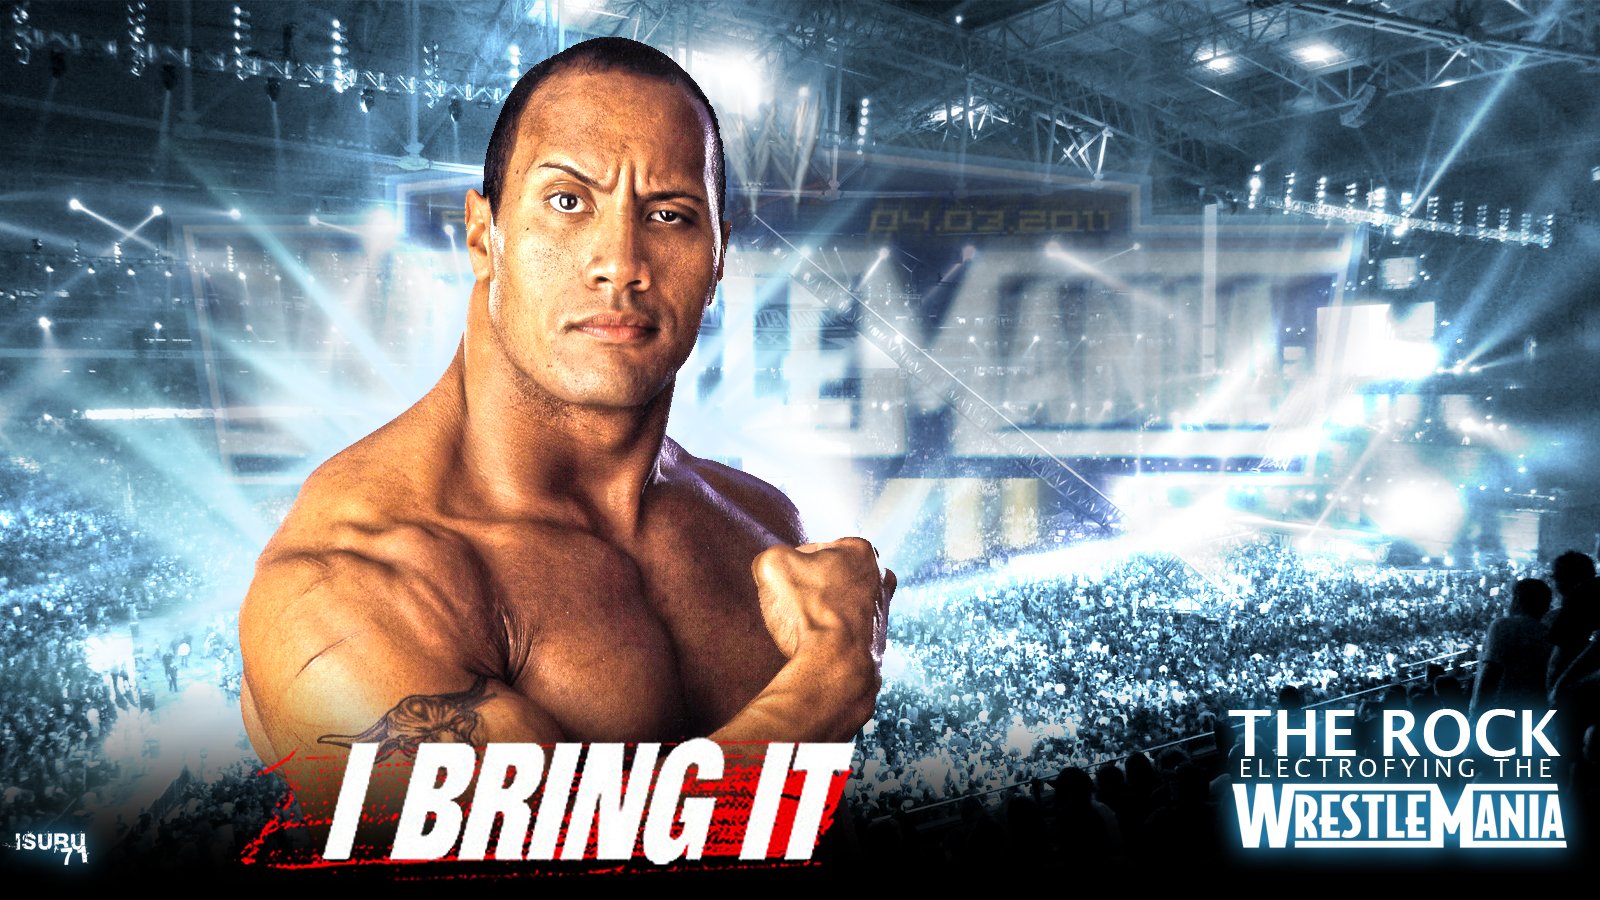 WWE image The Rock HD wallpaper and background photo